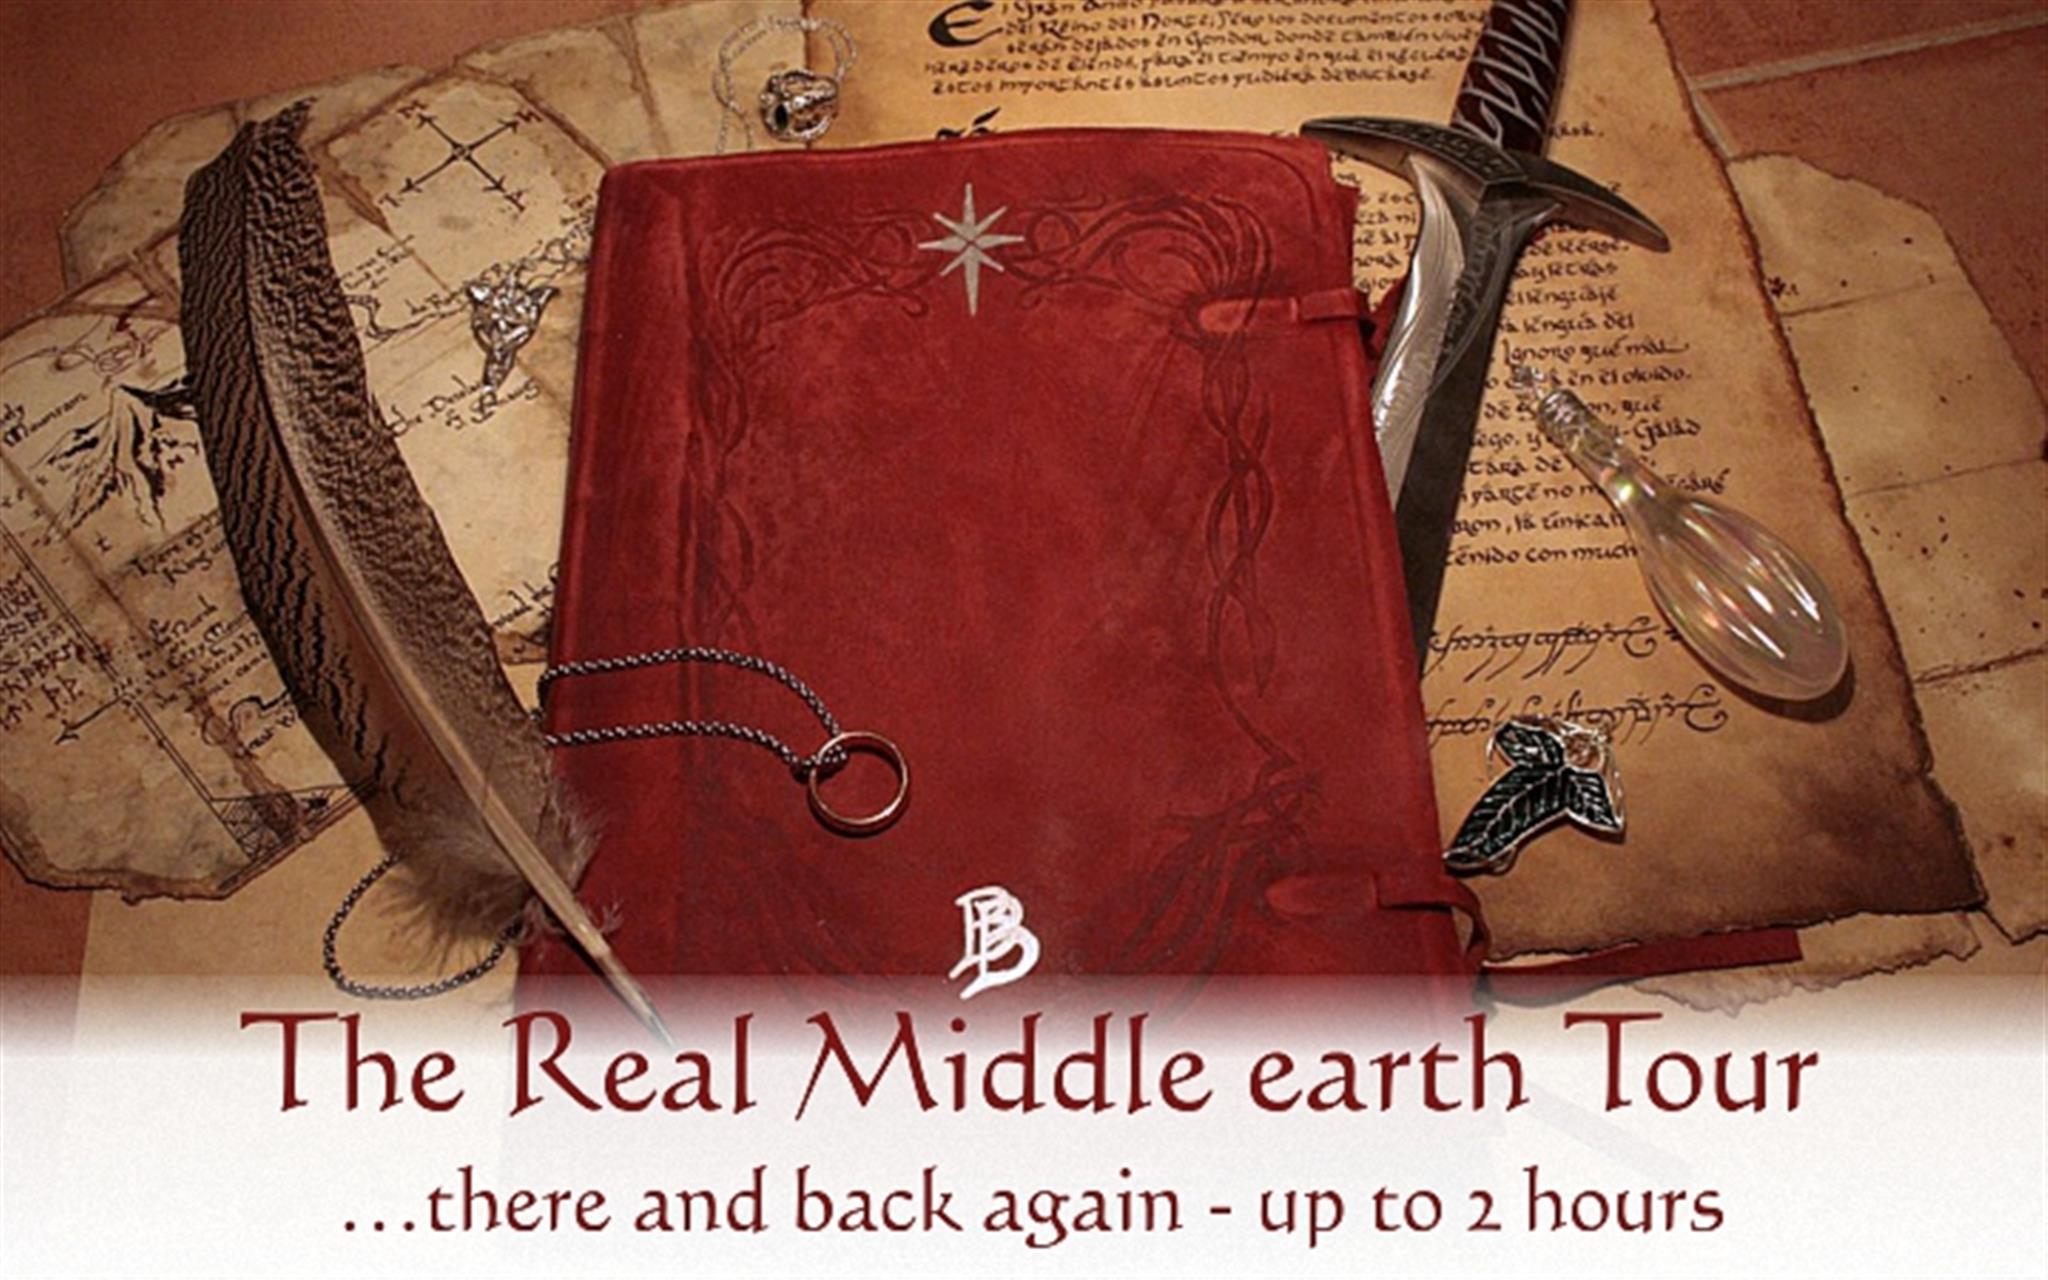 The Real Middle-earth Tour image